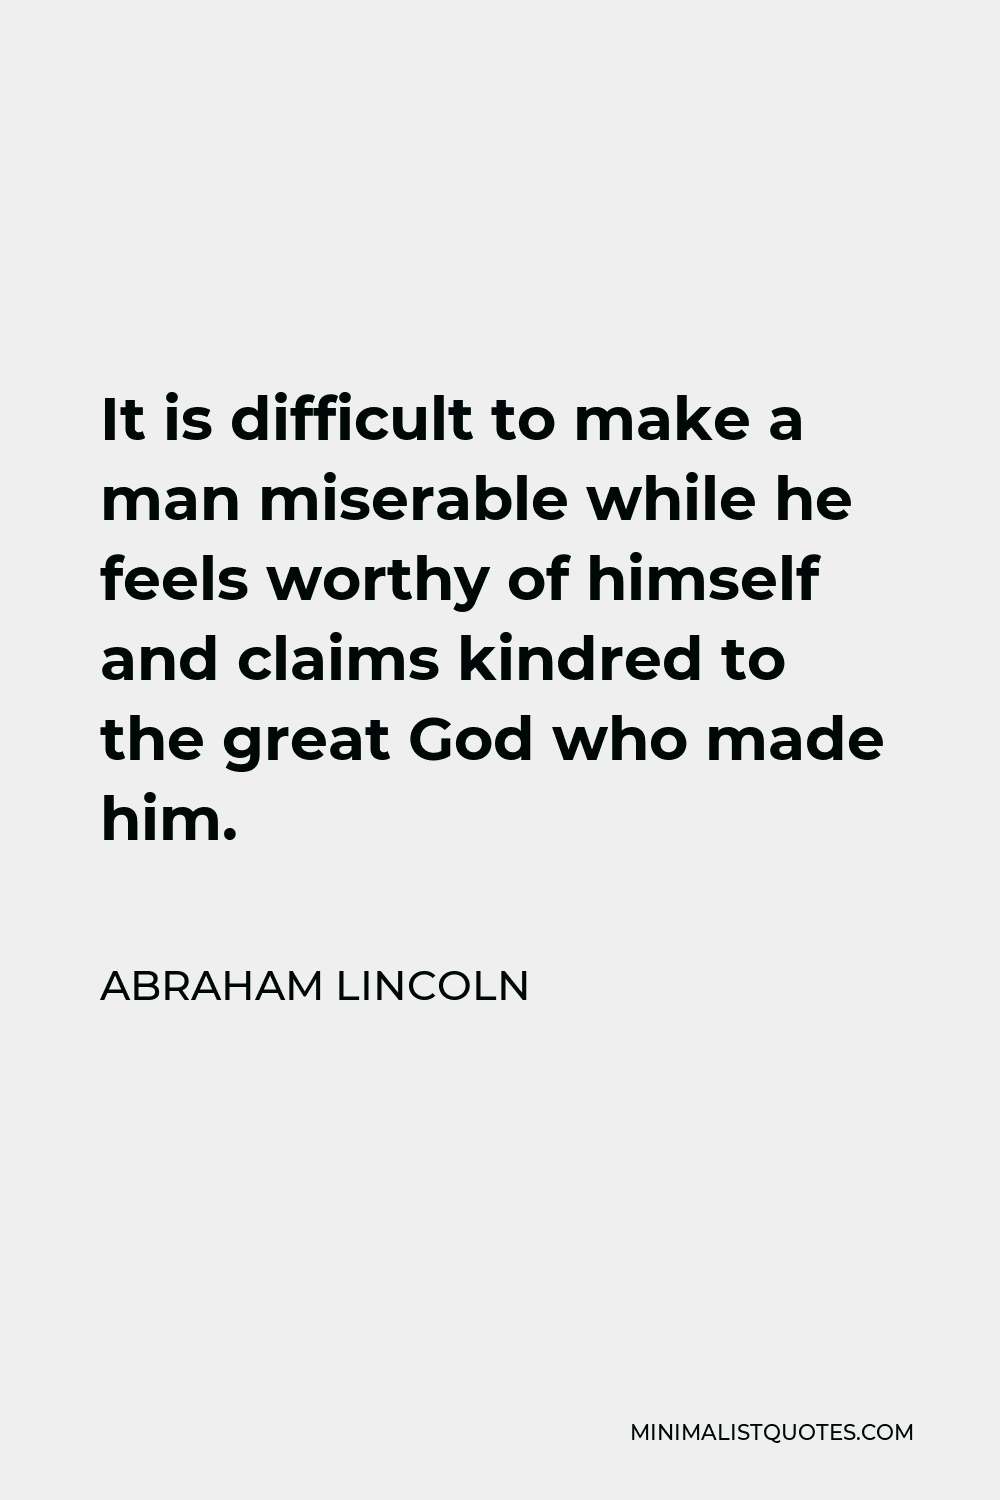 Abraham Lincoln Quote - It is difficult to make a man miserable while he feels worthy of himself and claims kindred to the great God who made him.